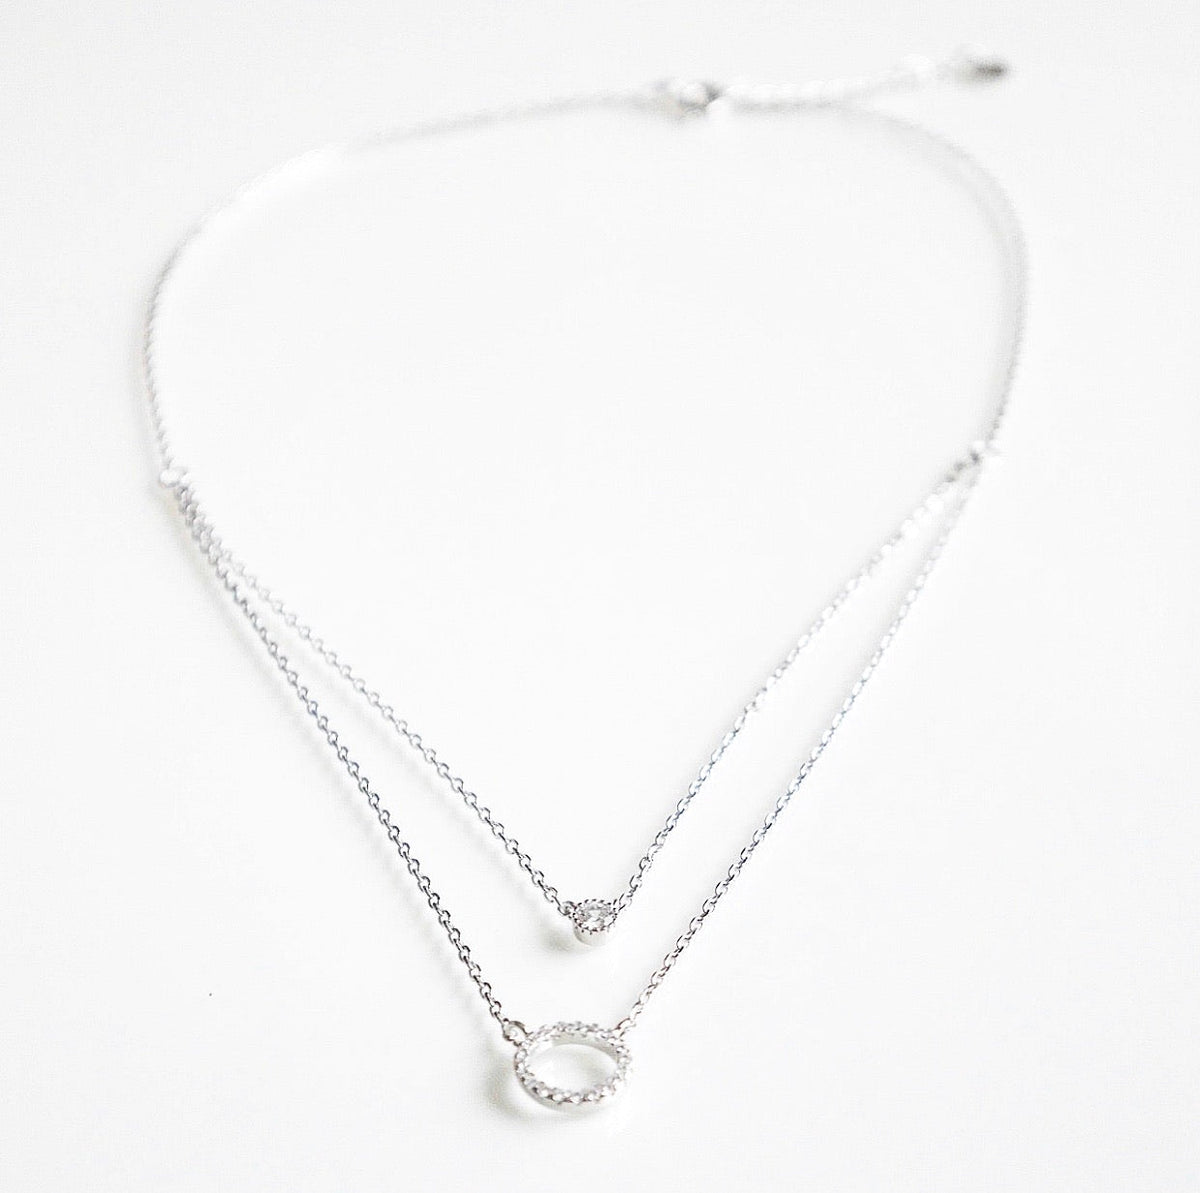 circle necklace, layered double circle diamond zircon .925 sterling silver necklace waterproof for sensitive skin - cute necklaces for gift ideas, trending popular influencer style trending on instagram and tiktok famous jewelry brands necklaces